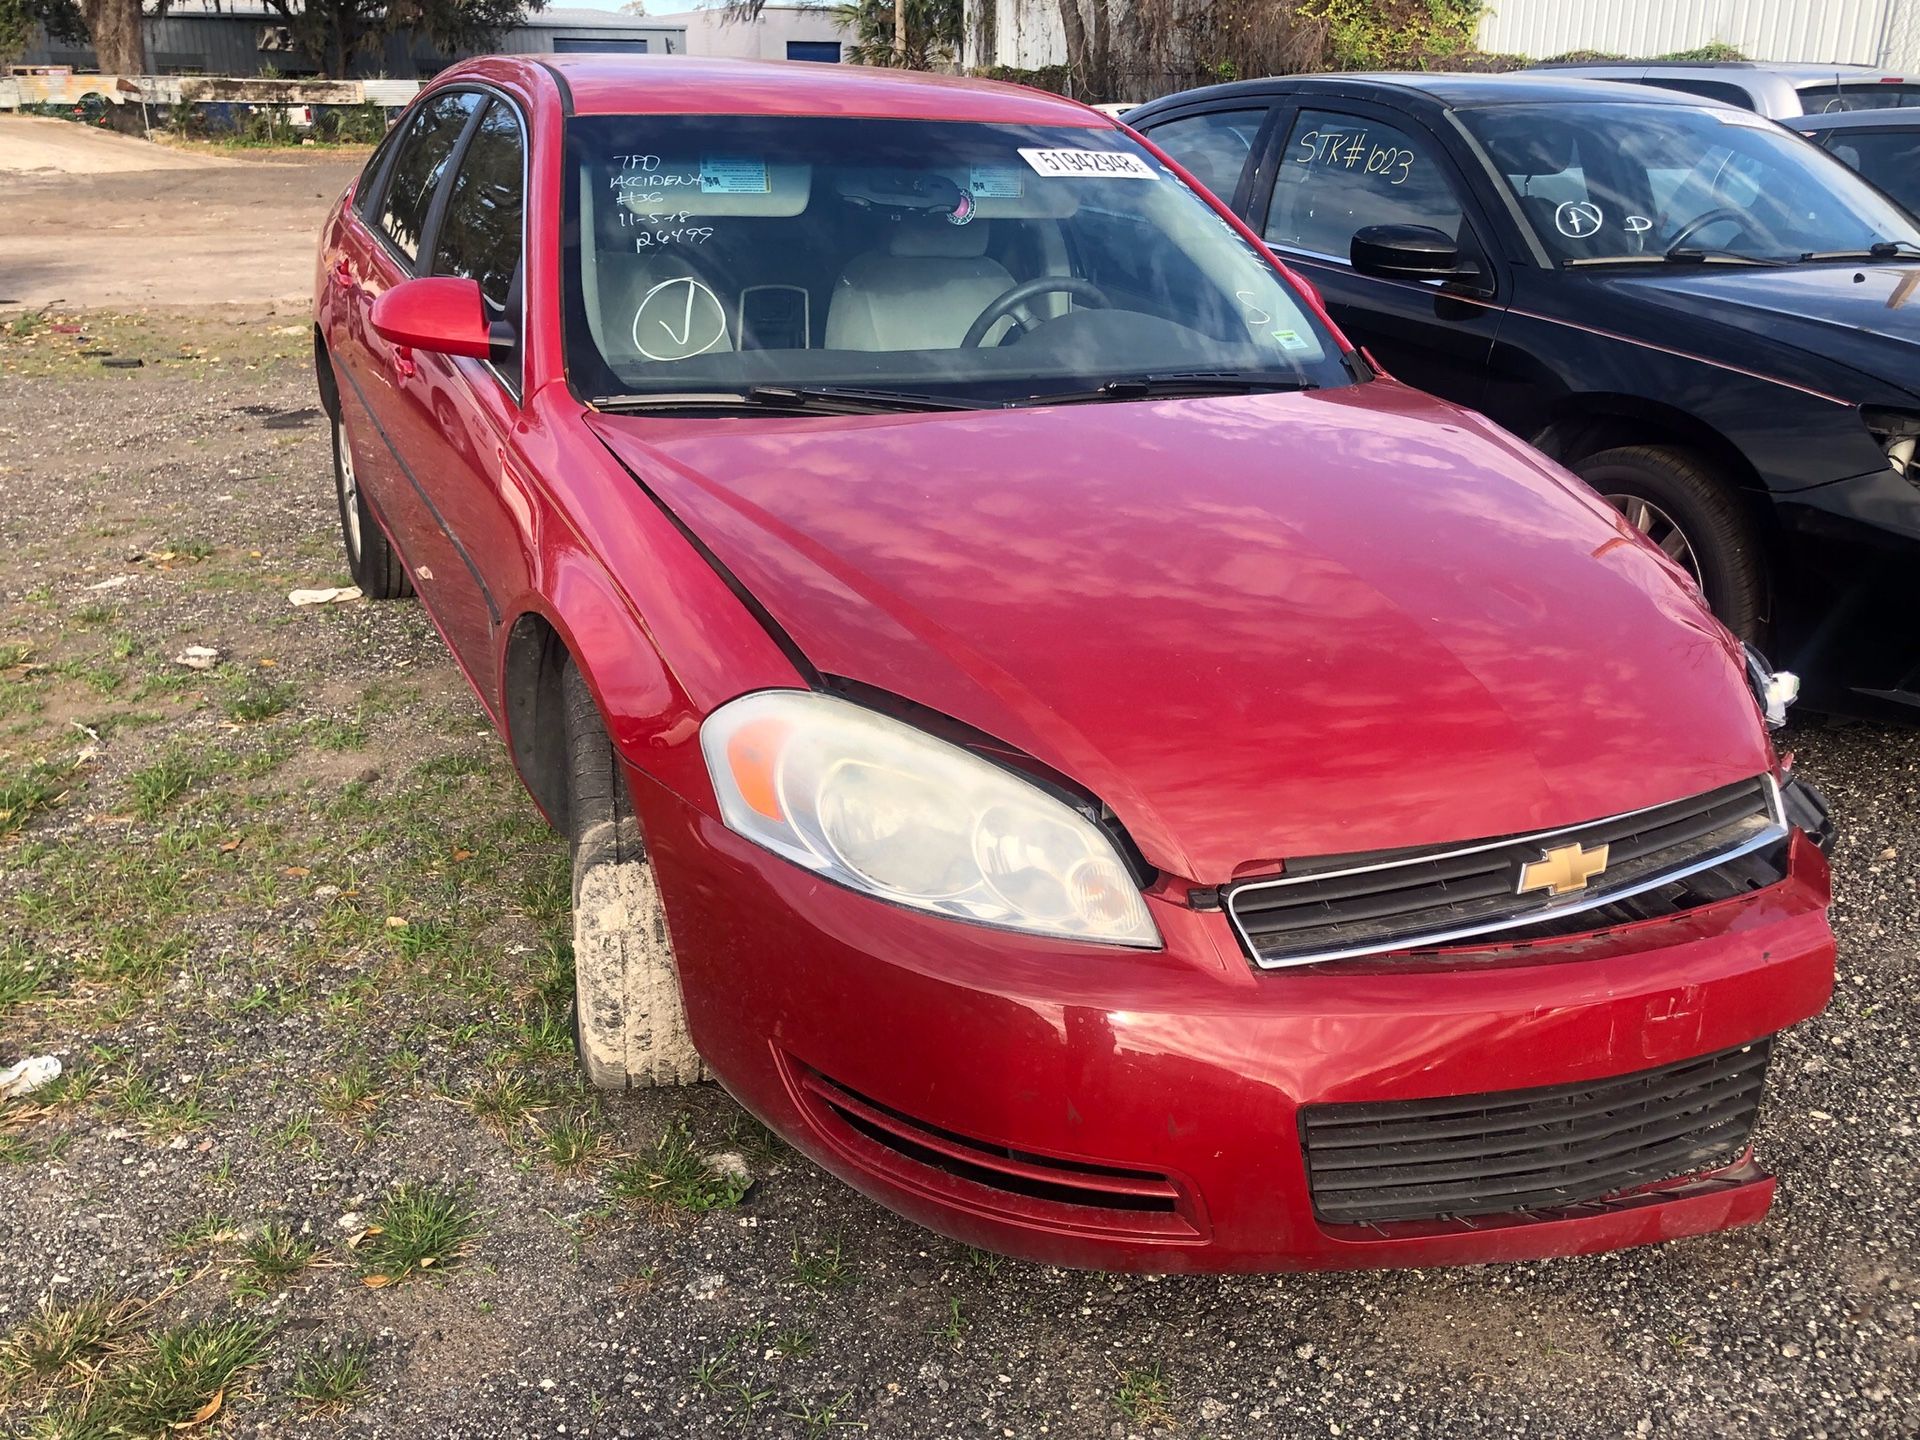 2008 Chevy Impala. Parts Only